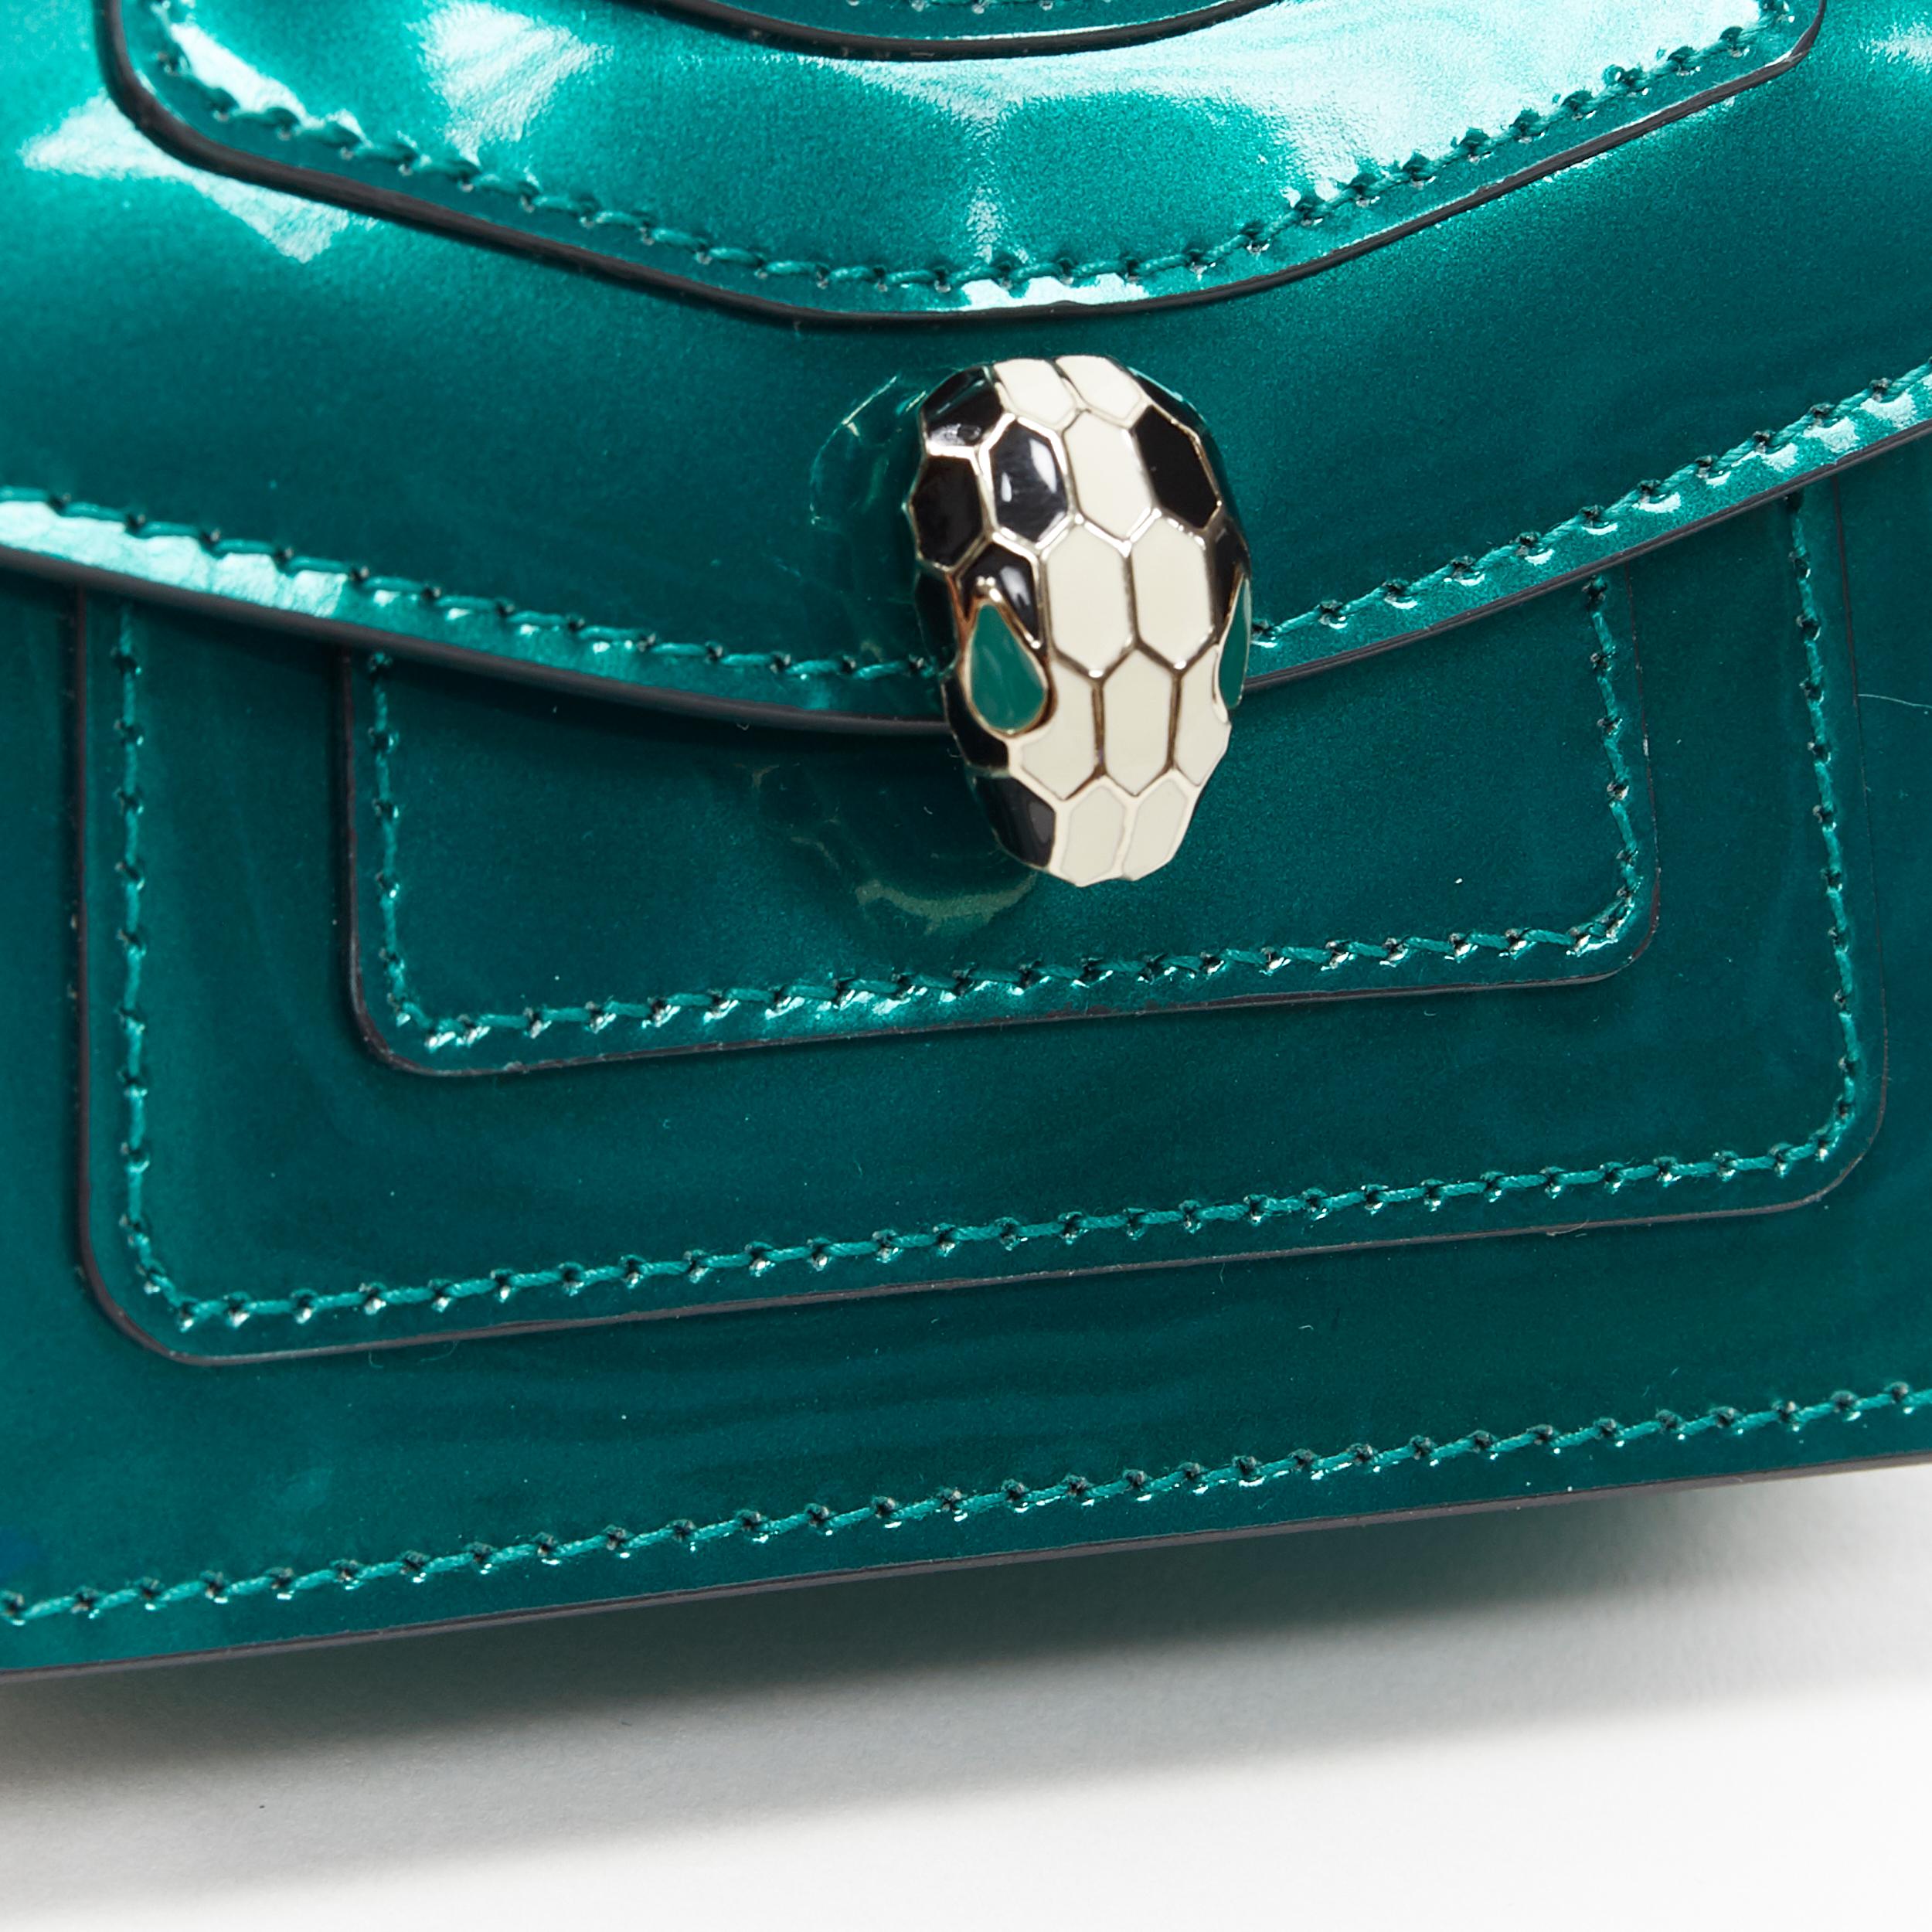 new BVLGARI Serpentine Forever emerald green patent snake flap mico bag charm
Brand: Bvlgari
Collection: Serpenti Forever
Model Name / Style: Micro bag charm
Material: Leather
Color: Green
Pattern: Solid
Closure: Button
Extra Detail: Bag charm, can